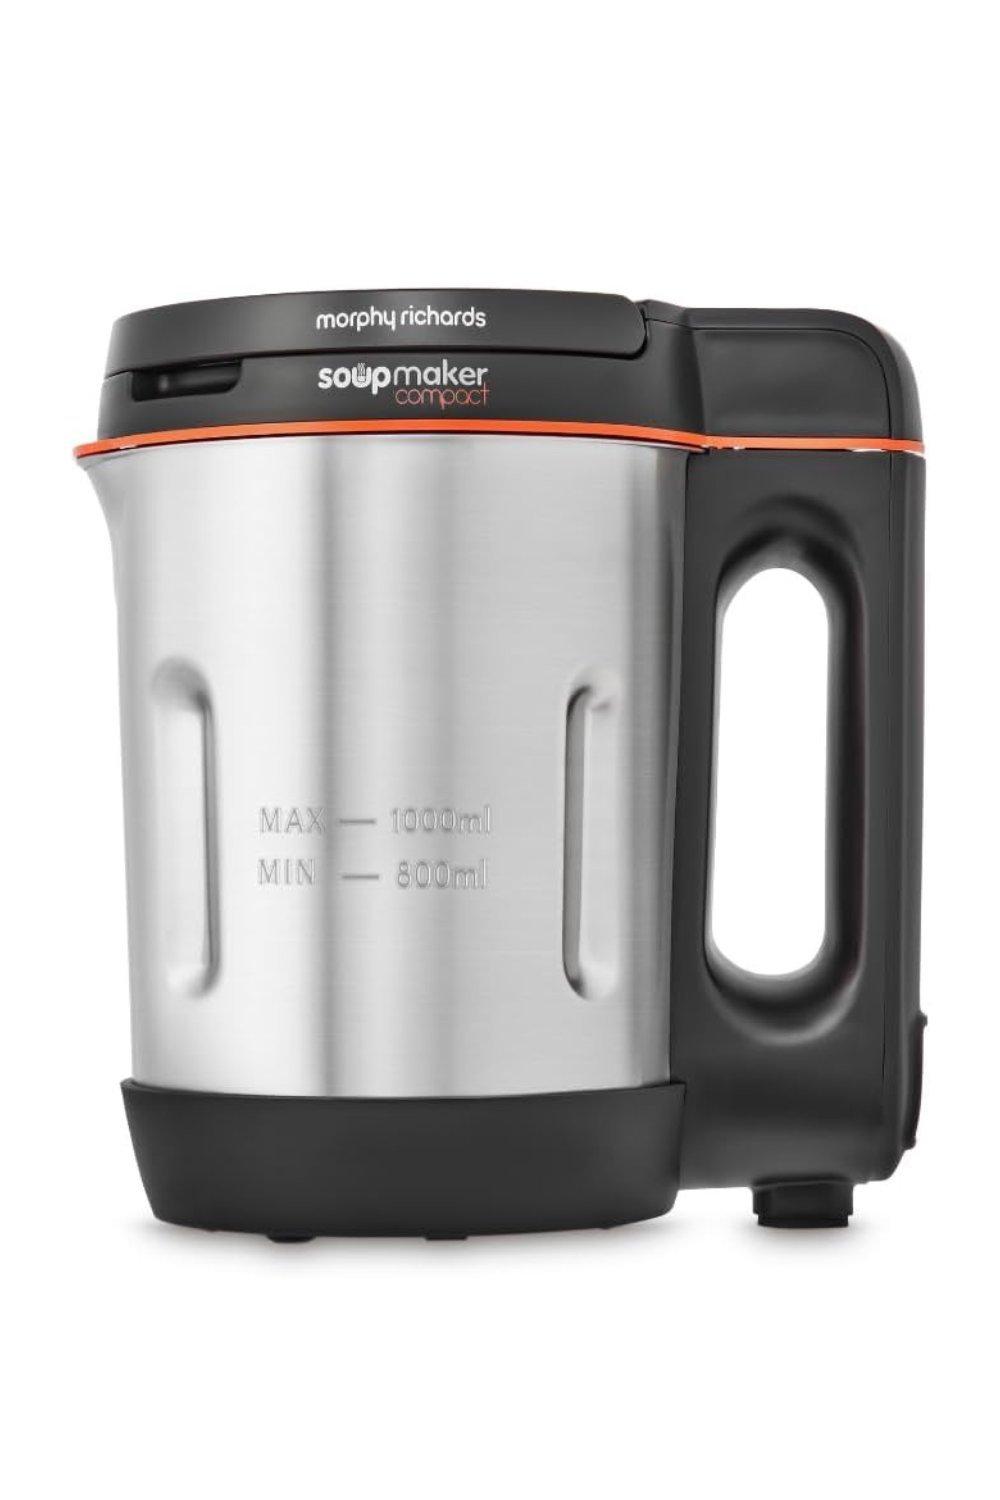 Morphy Richards Compact 501021 1 Litre Soup Maker - Stainless Steel